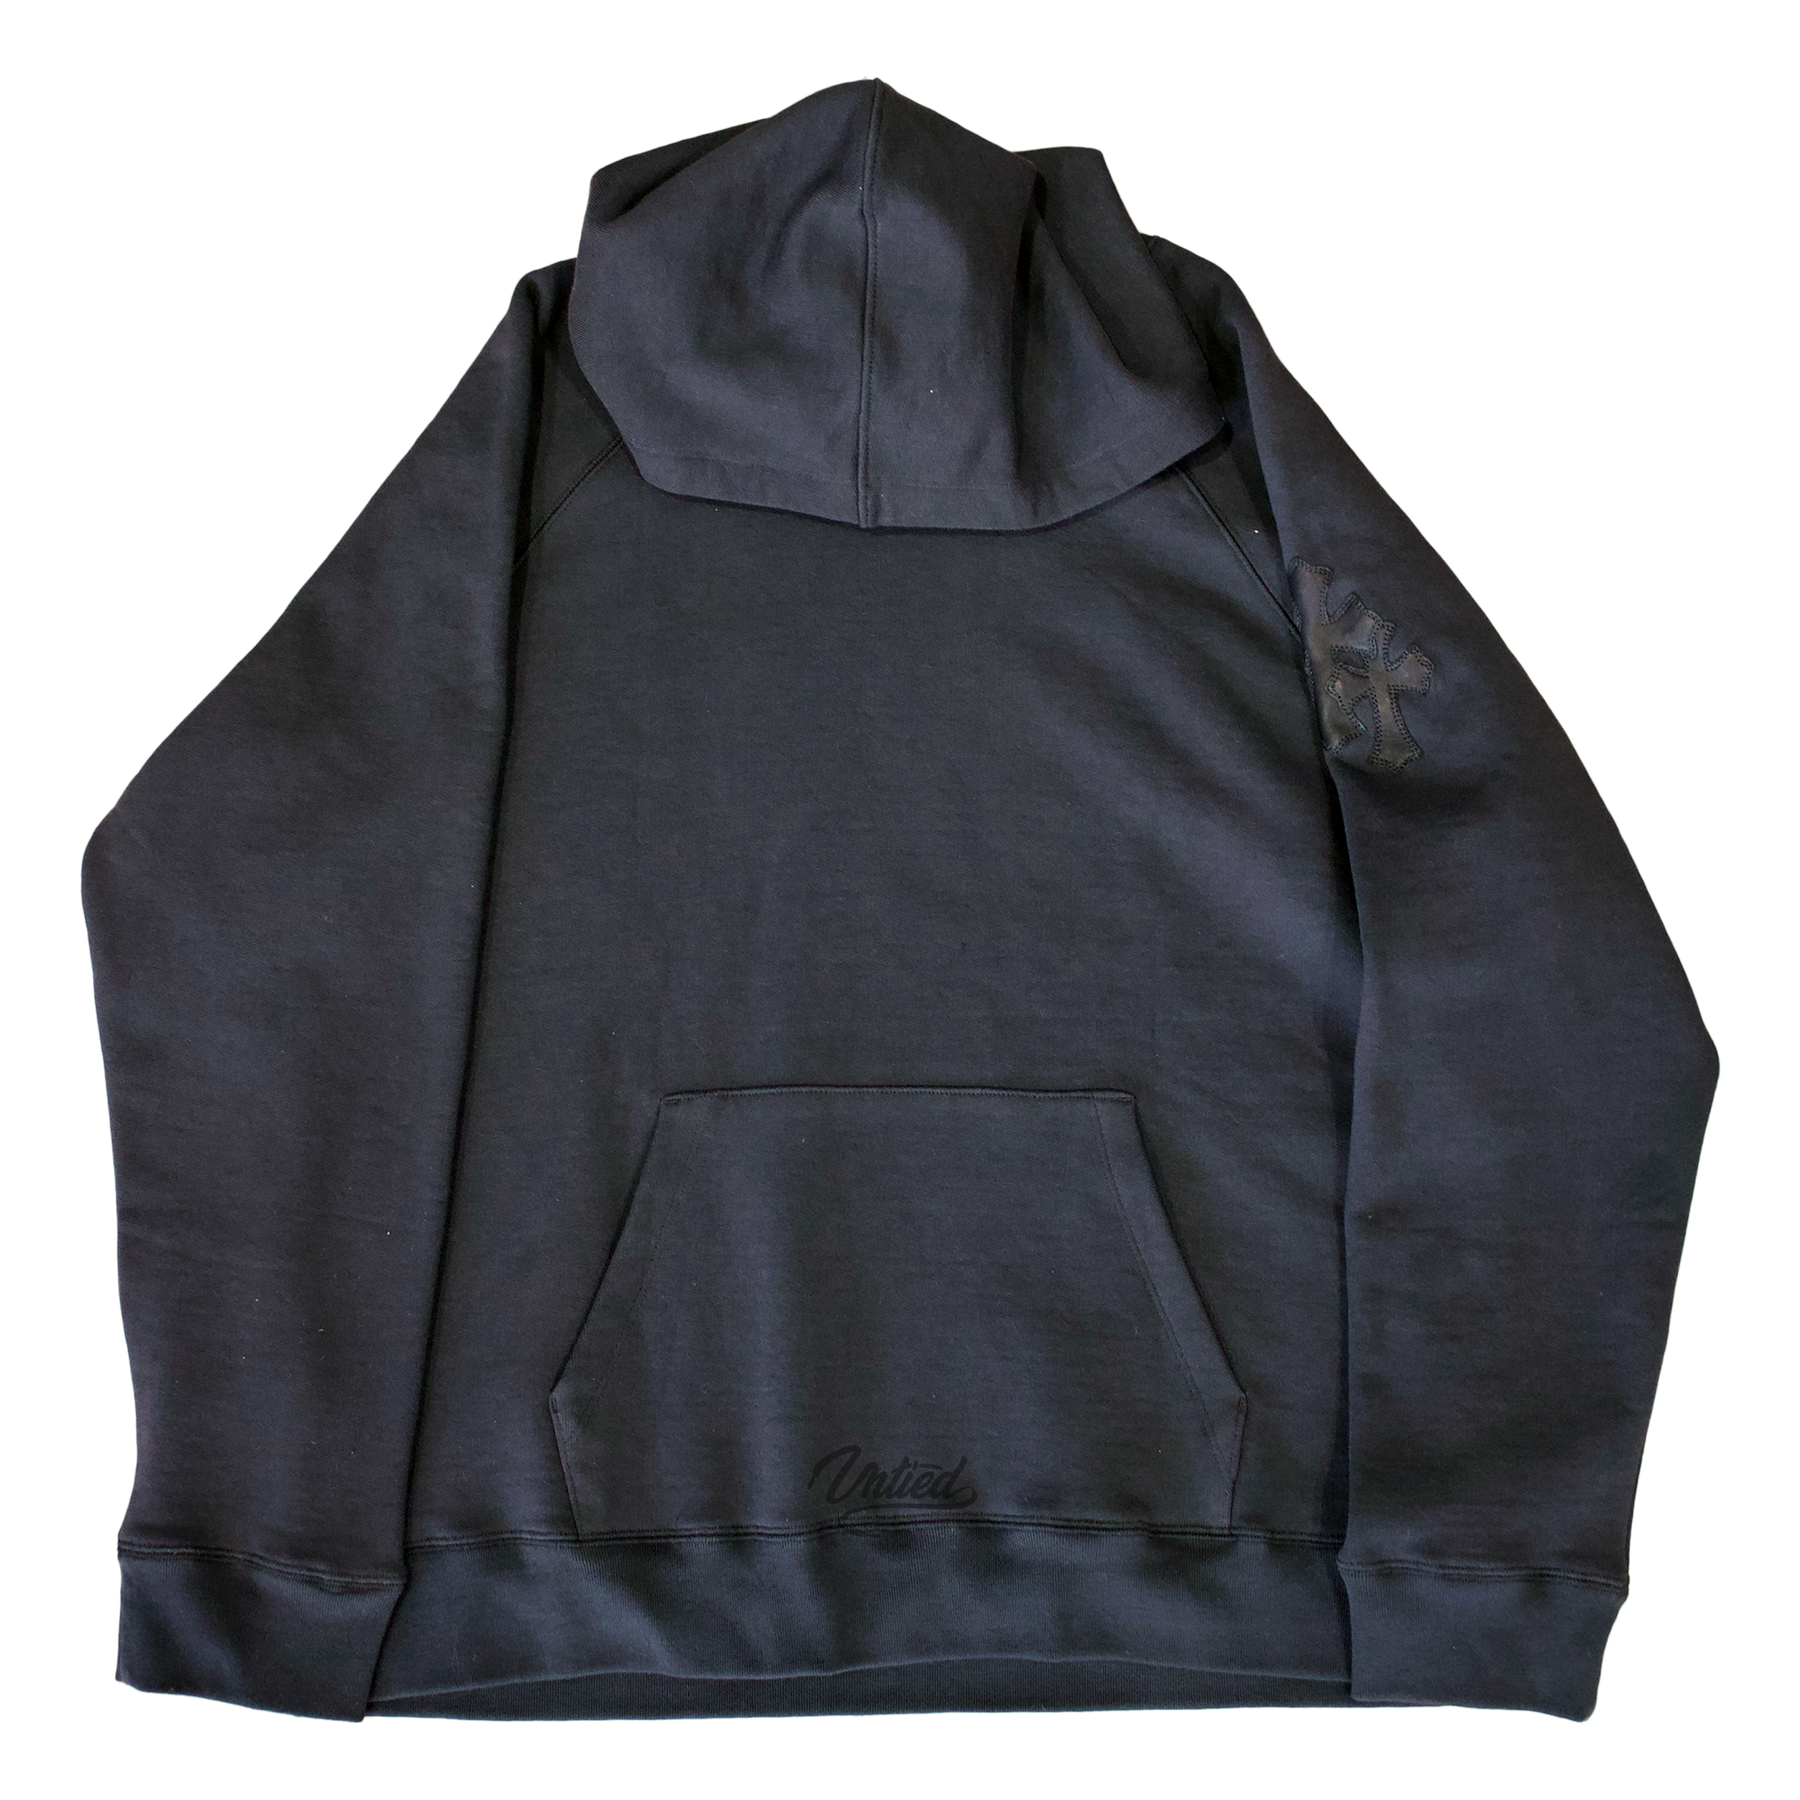 Chrome Hearts Cemetery Patches Hoodie "Black/Black"